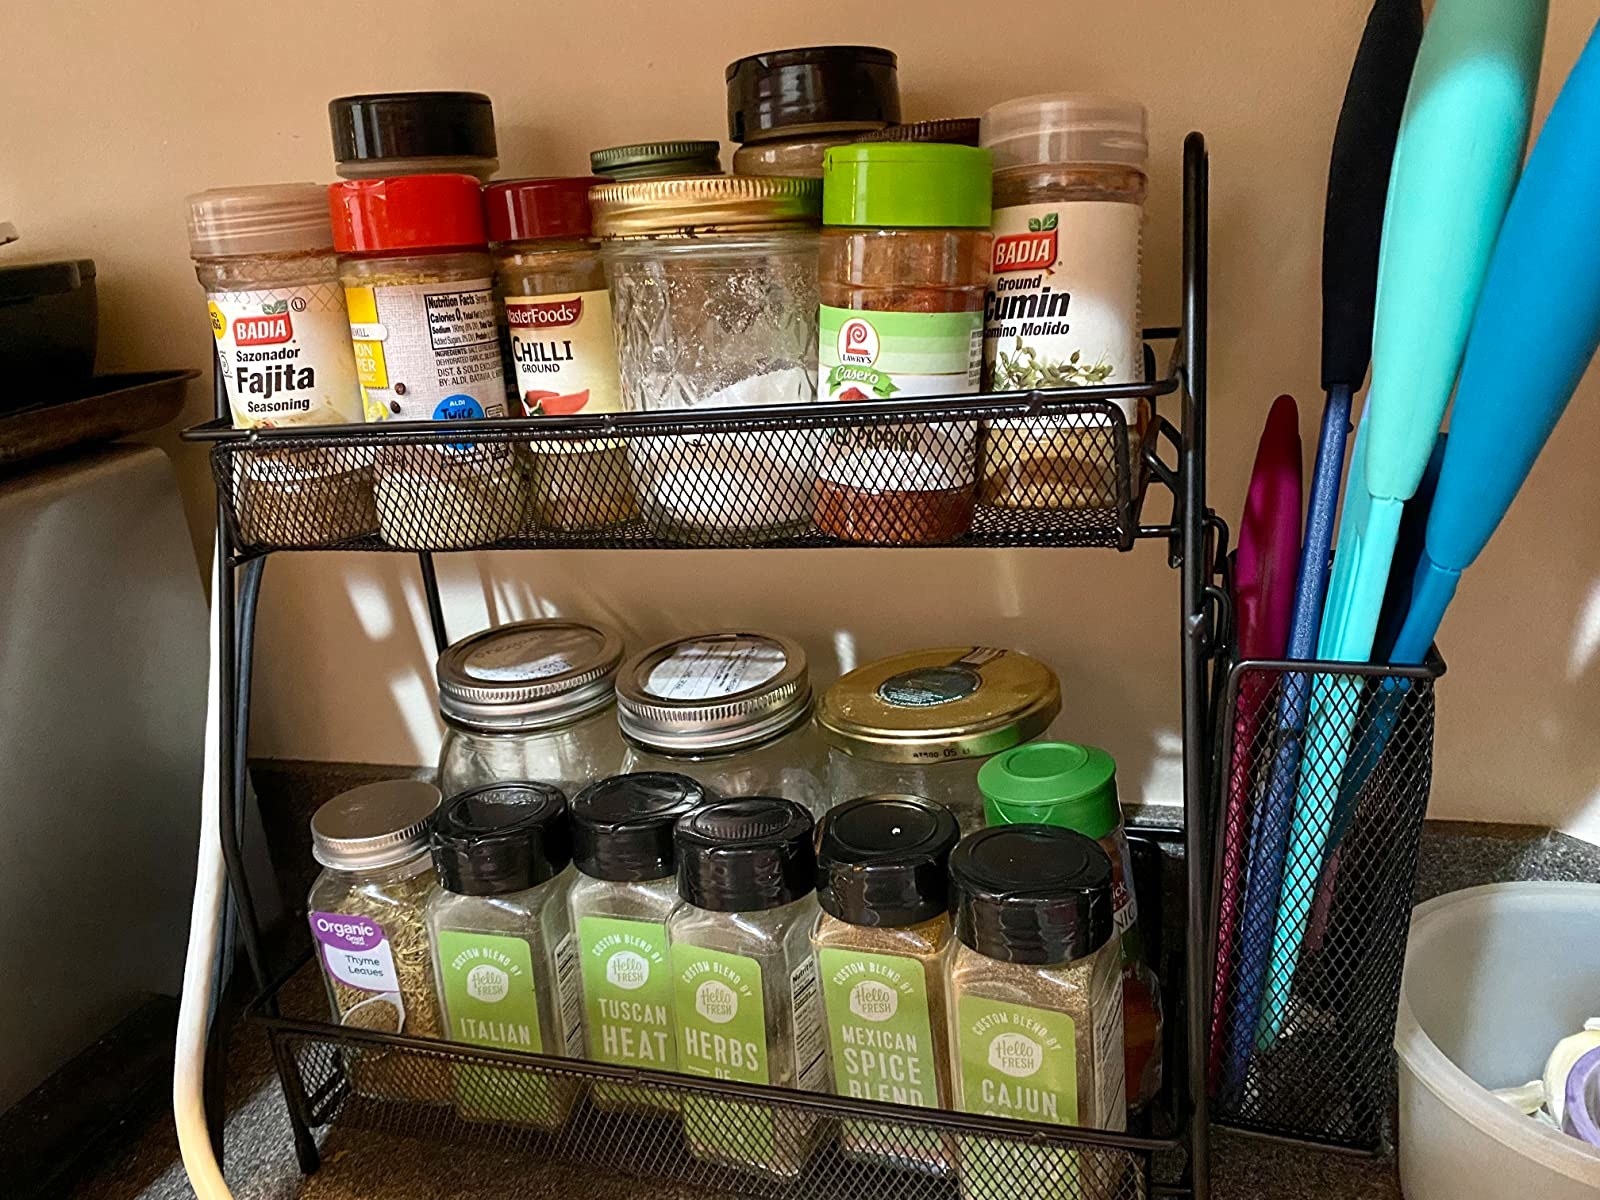 Reviewer image of shelf with spices on their countertop